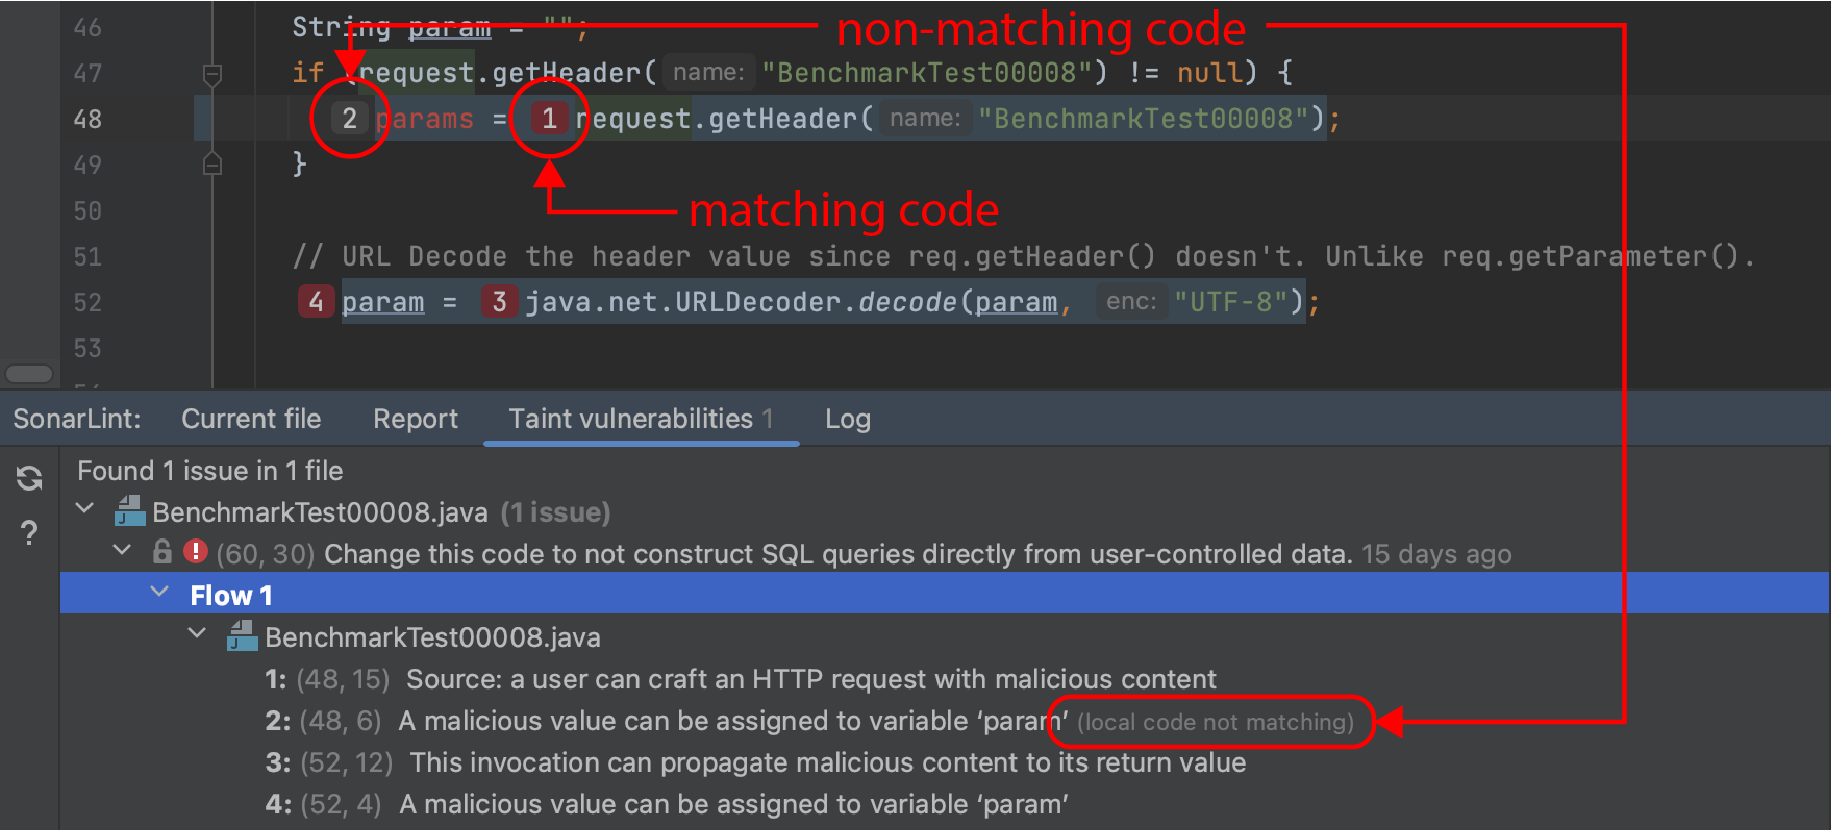 SonarLint will let you know if your code matches that on the server.